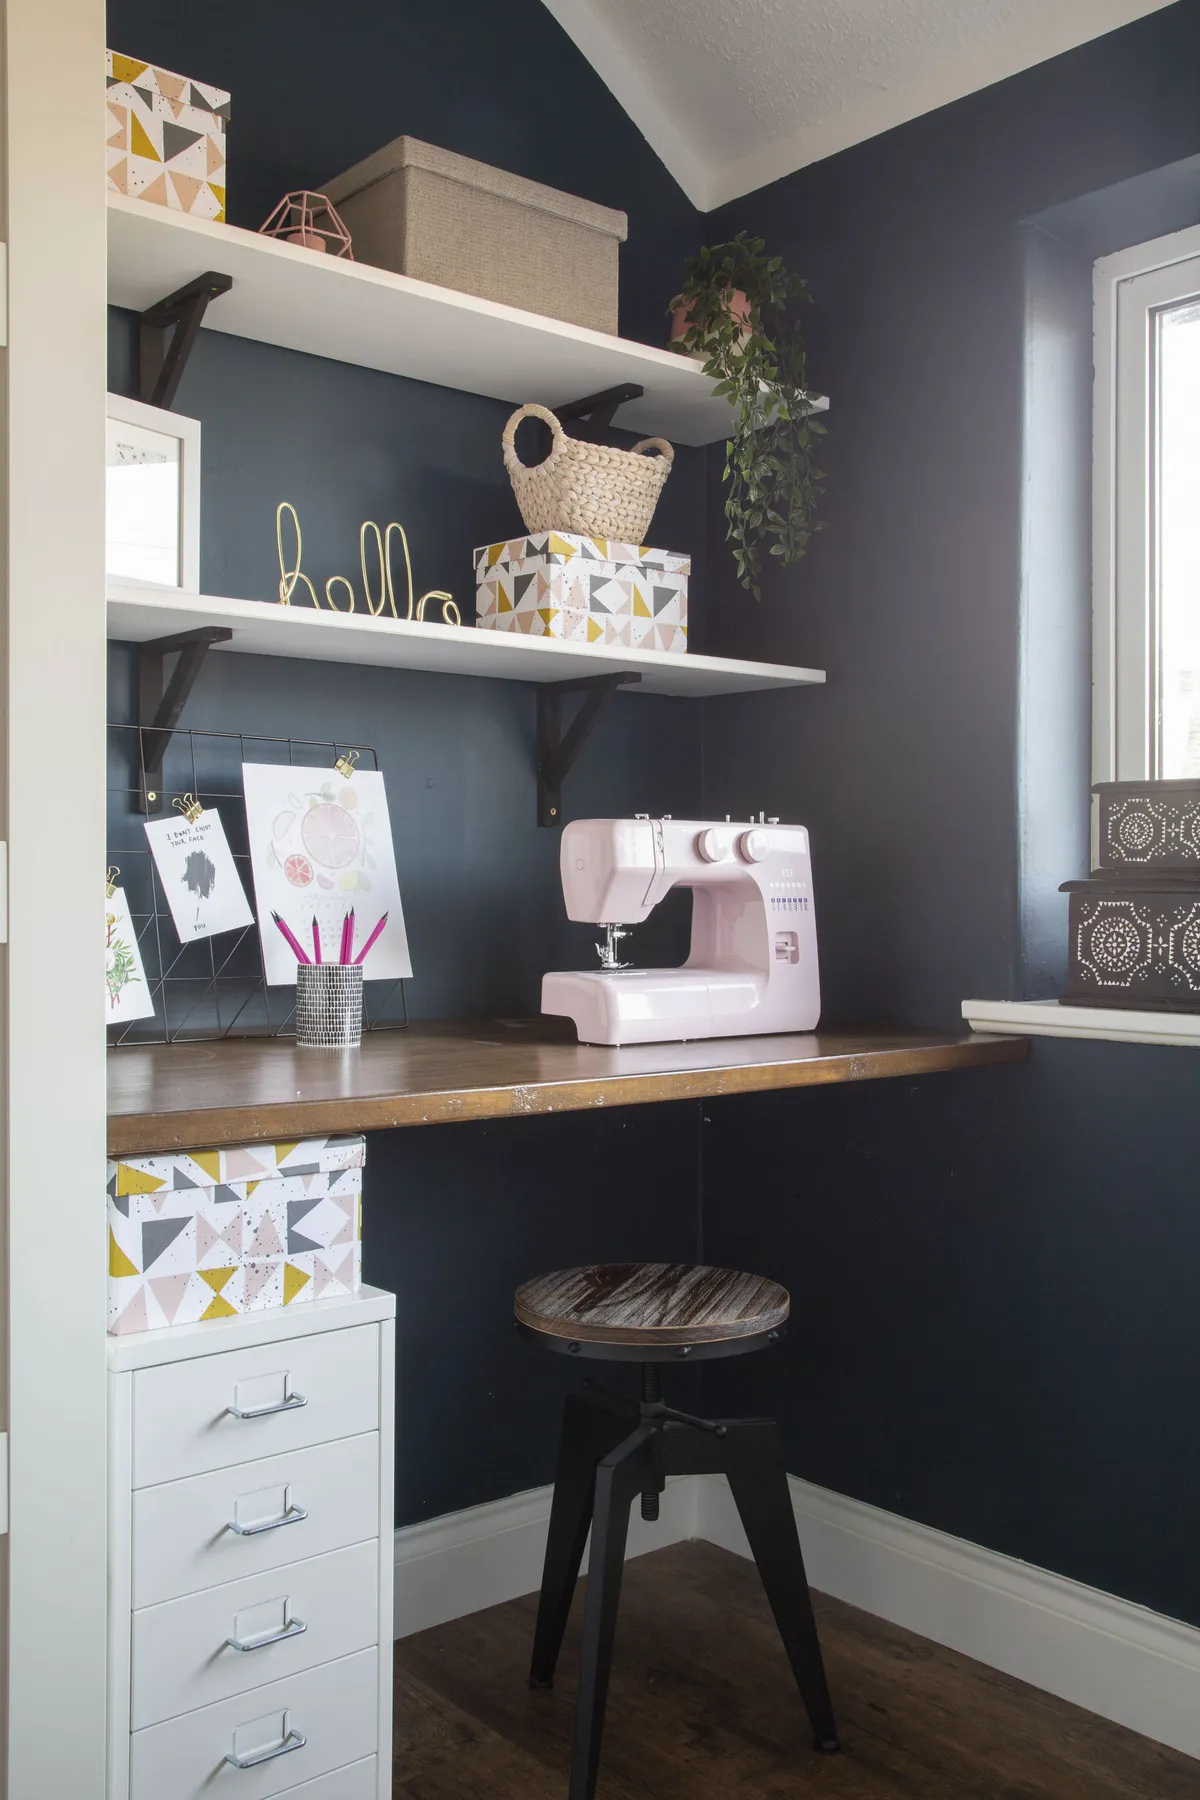 Ruth chose Farrow & Ball’s Hague Blue for the office walls to give it a rich and elegant appearance and added contrast with white shelving and storage. ‘The desk is made from a piece of plywood that I stained and David mounted to the wall,’ Ruth says. ‘It’s simple and sturdy’